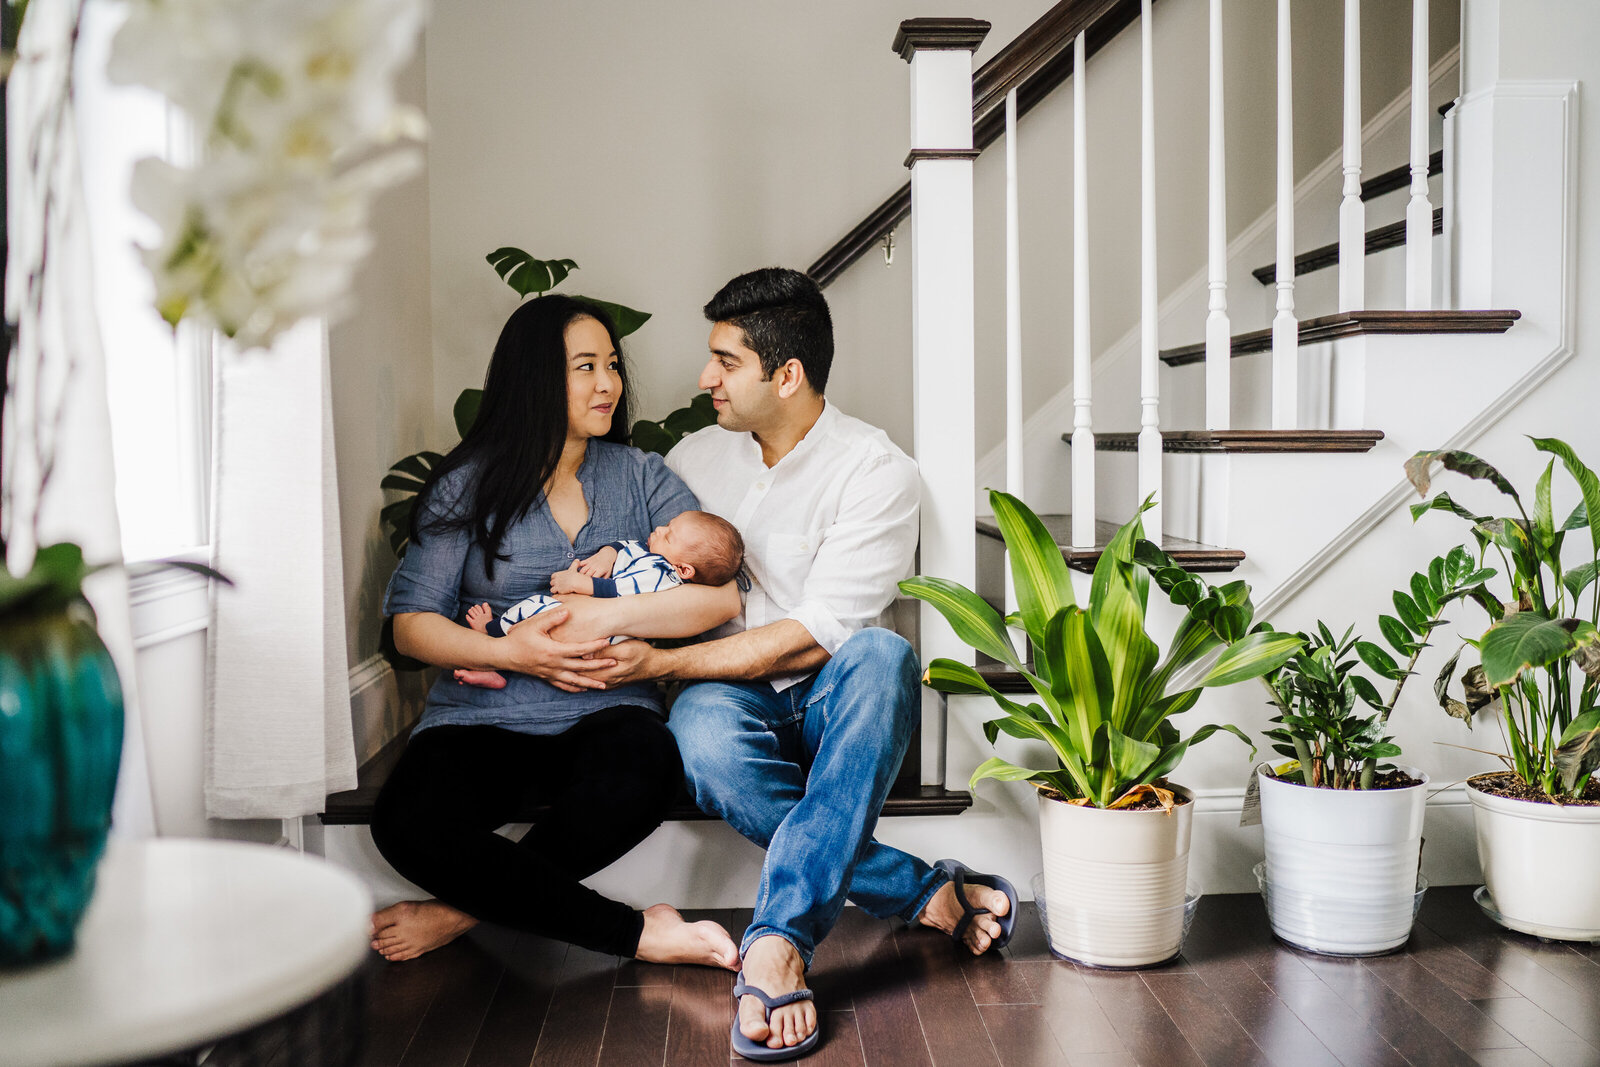 parents with new baby sit at bottom of stairwell surrounded by plants